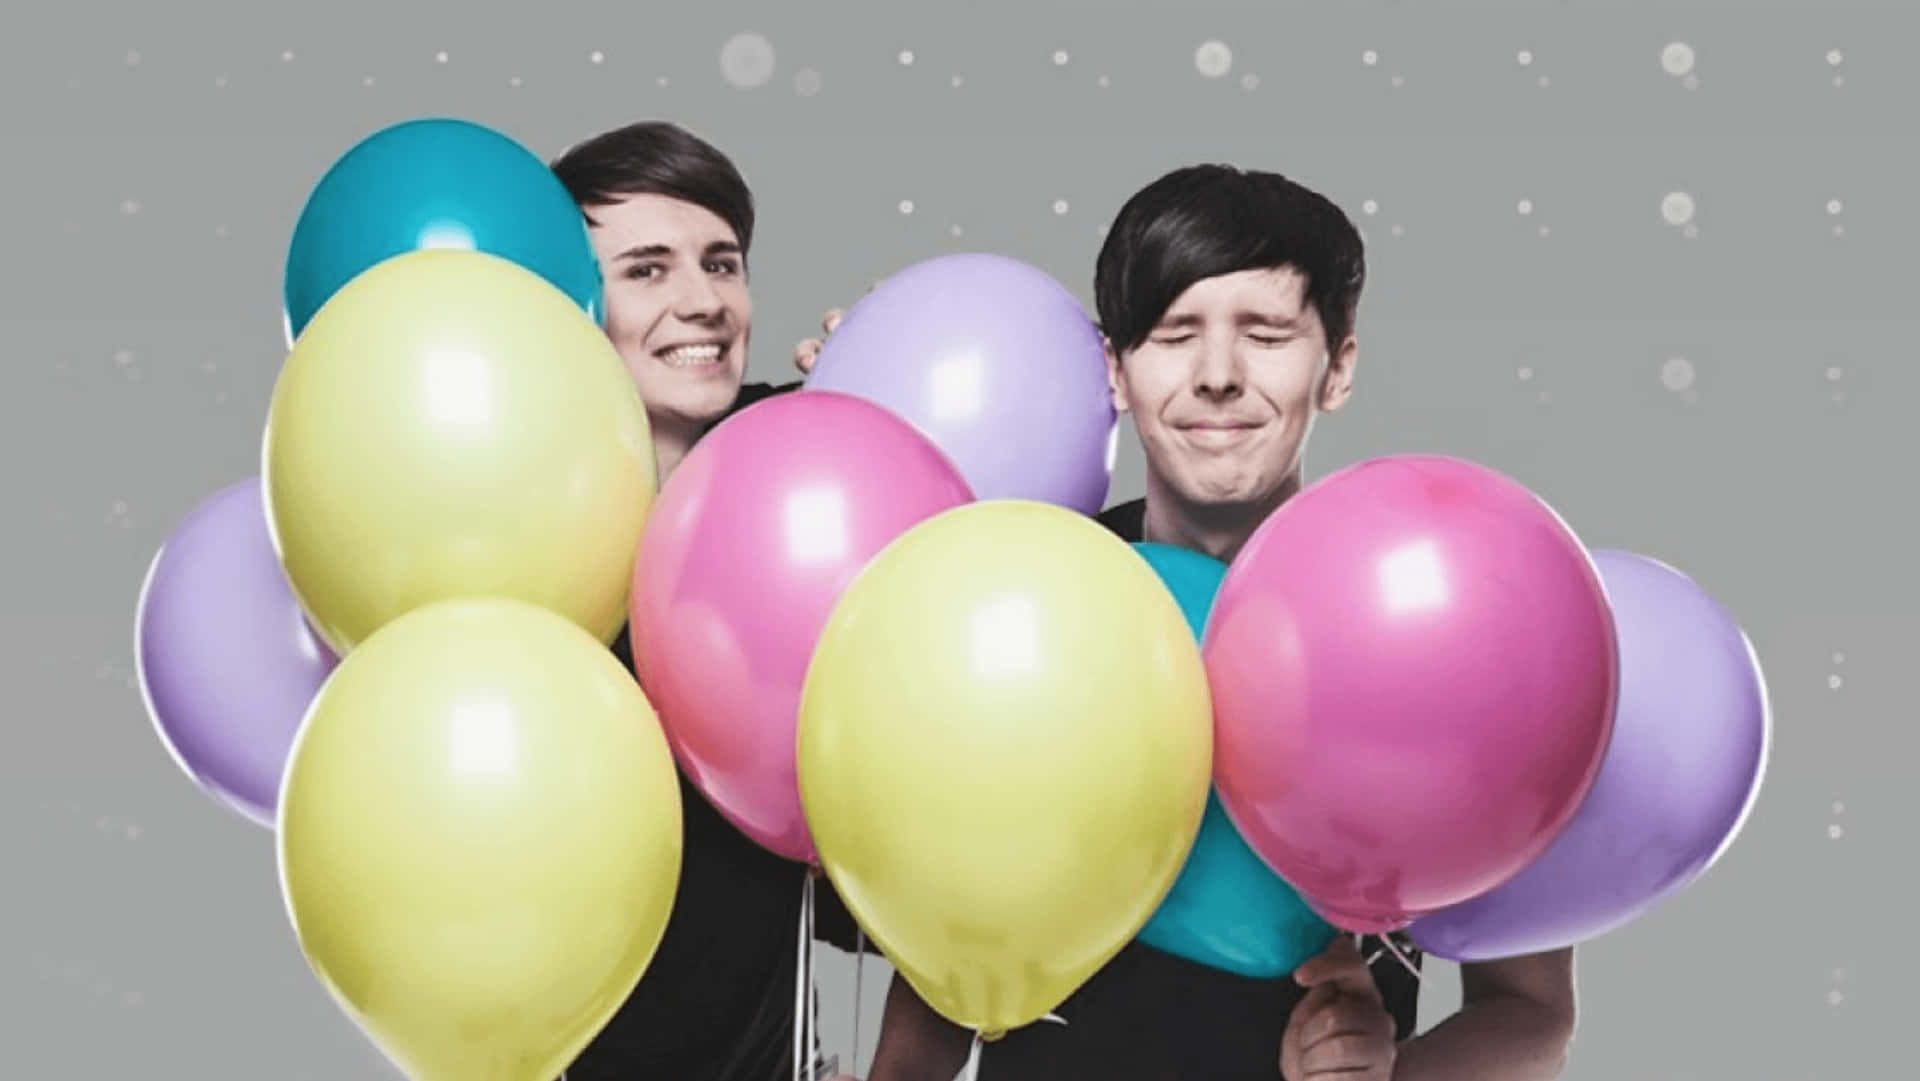 Best Friends Dan And Phil Bring Out The Best Of Each Other.